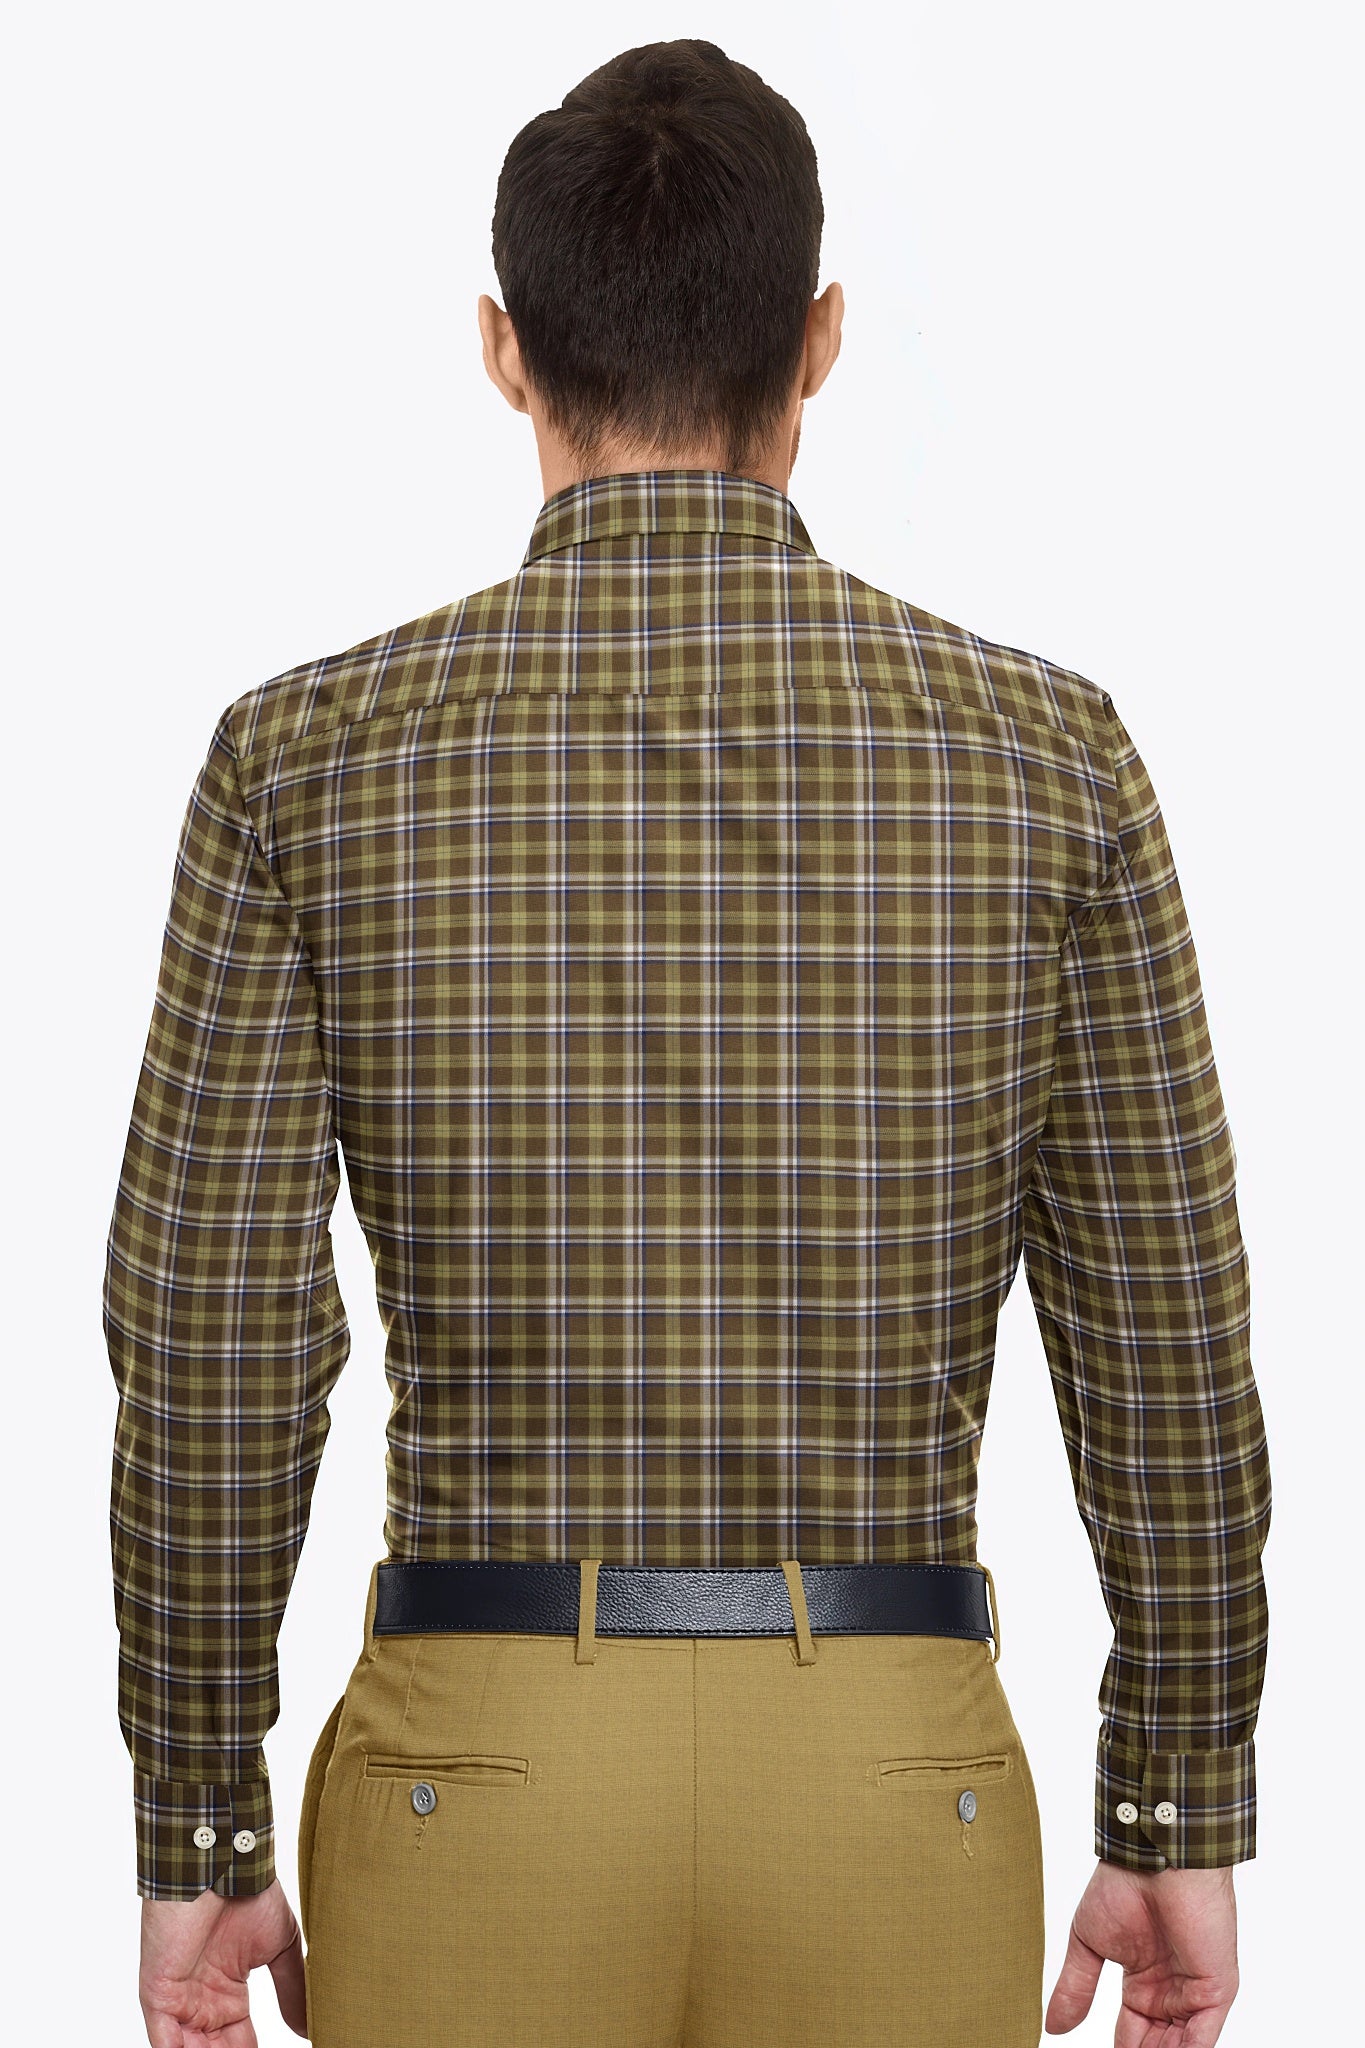 Coffee brown and Khaki with Sapphire Blue and White Checks  Cotton Shirt